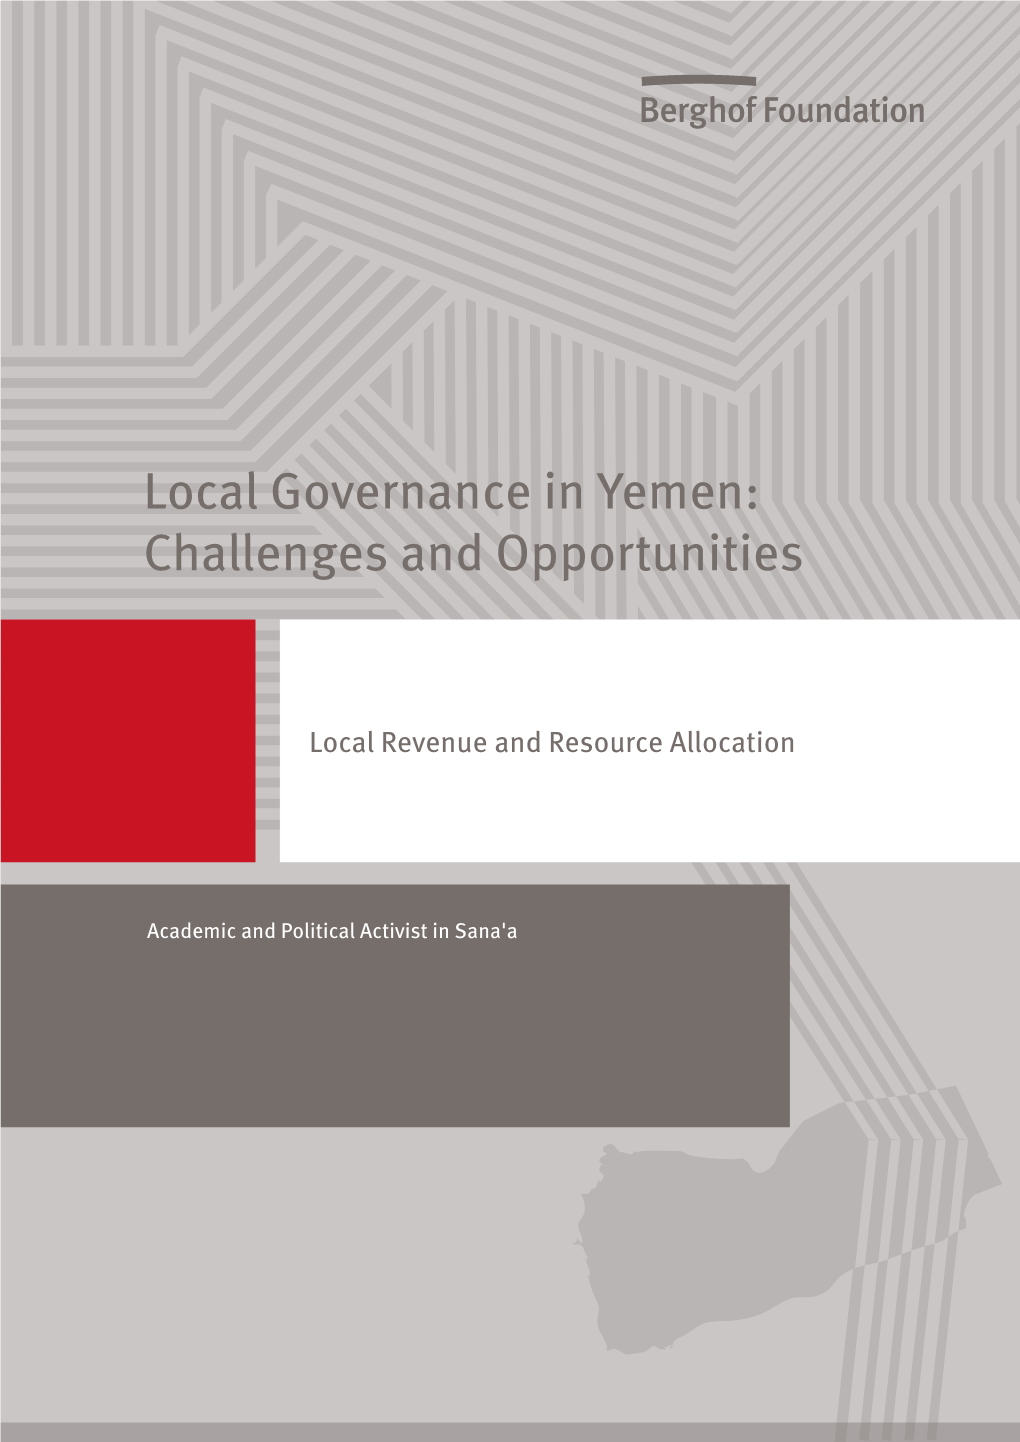 Local Governance in Yemen: Challenges and Opportunities